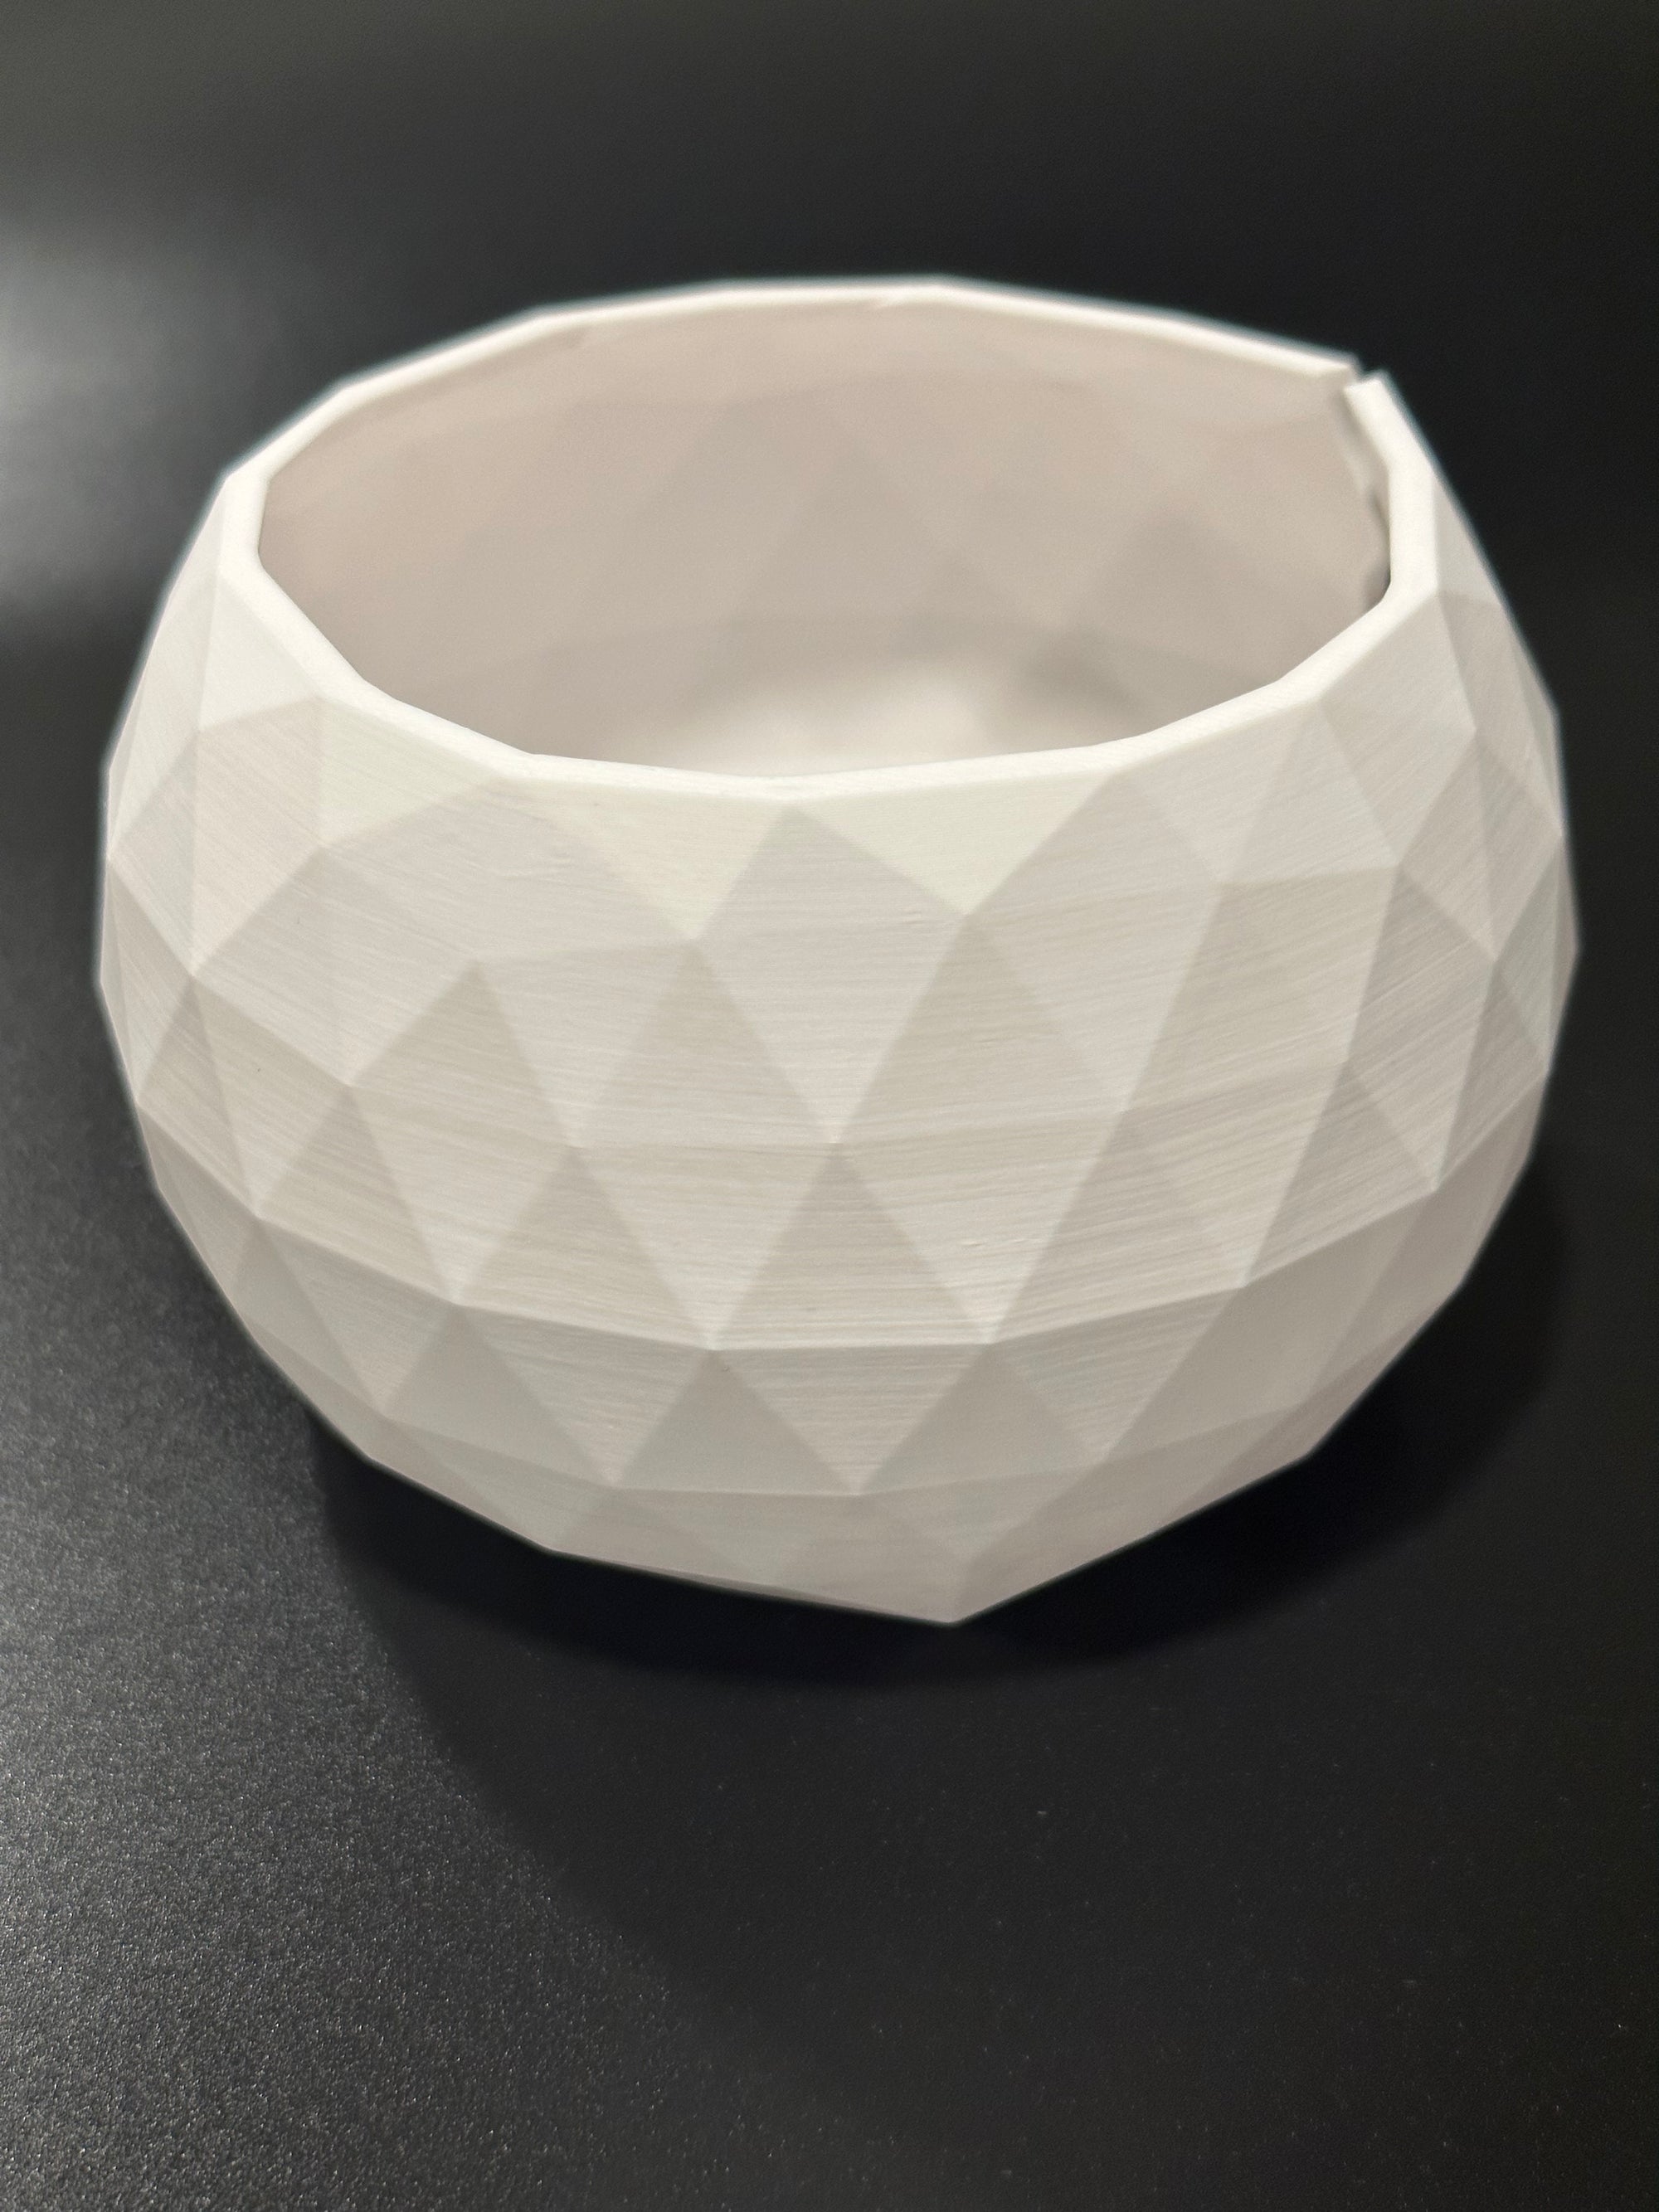 Modern  Knitting Yarn Bowl, 3D Printed, Sleek & Stylish Design, Perfect for Knitters and Crocheters, Great Gift for Craft Lovers